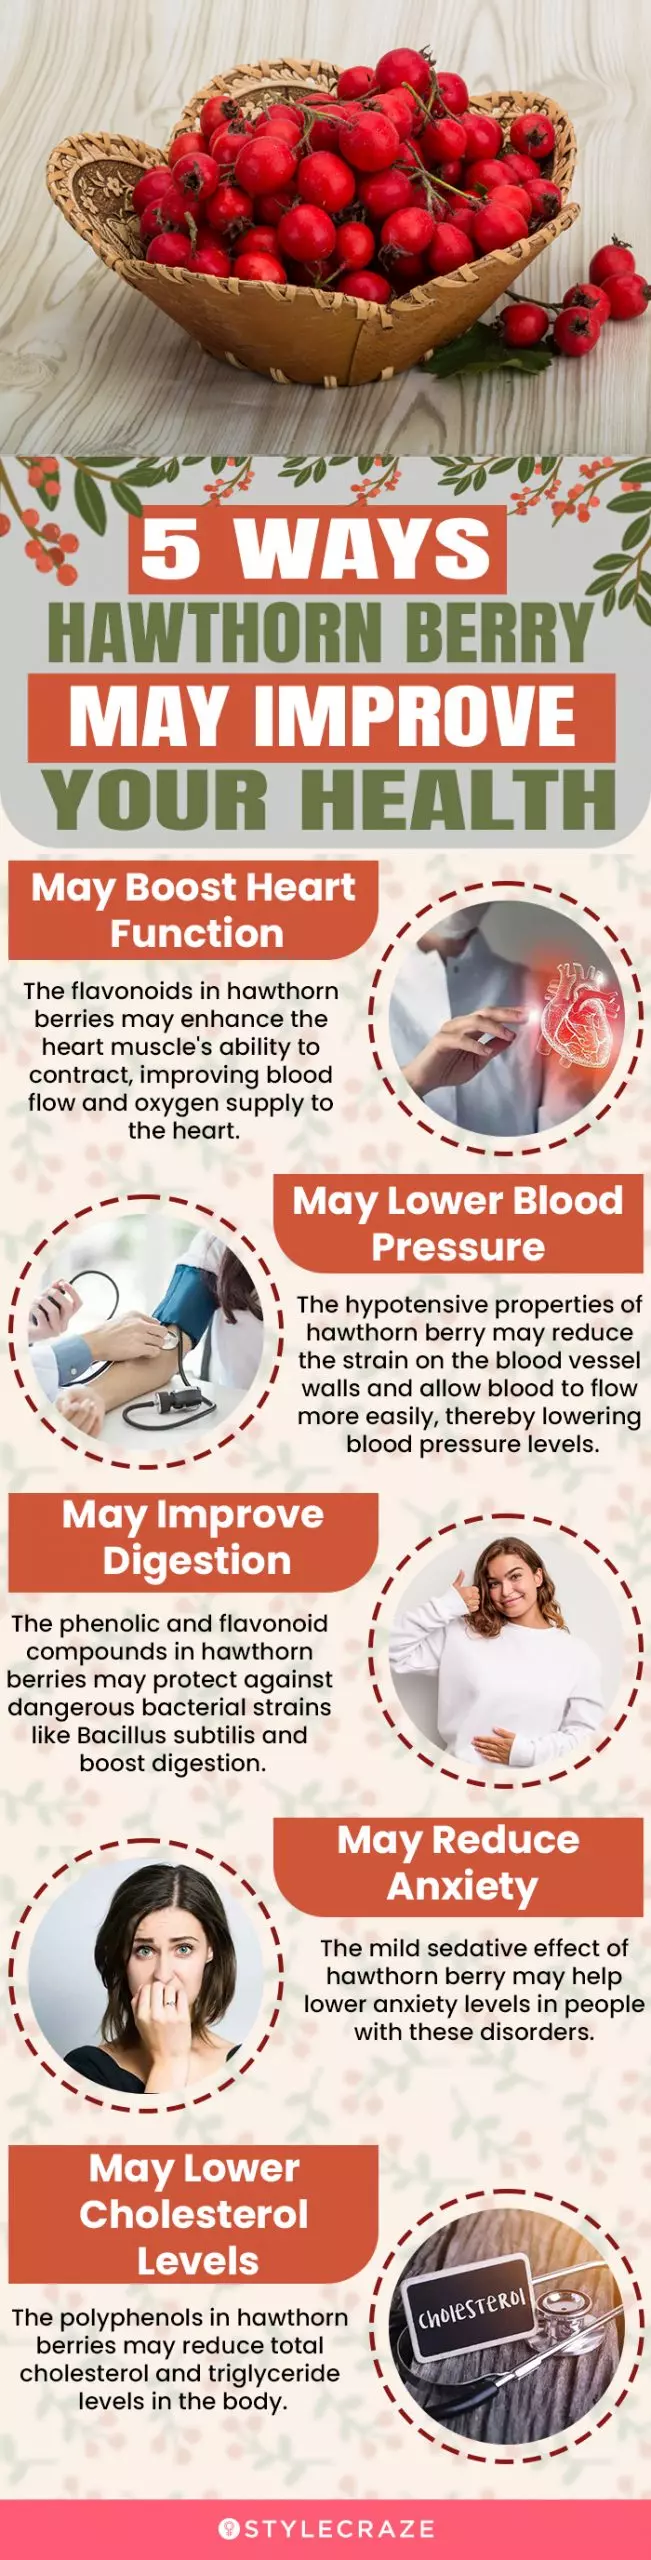 5 Ways Hawthorn Berry May Improve Your Health (infographic)